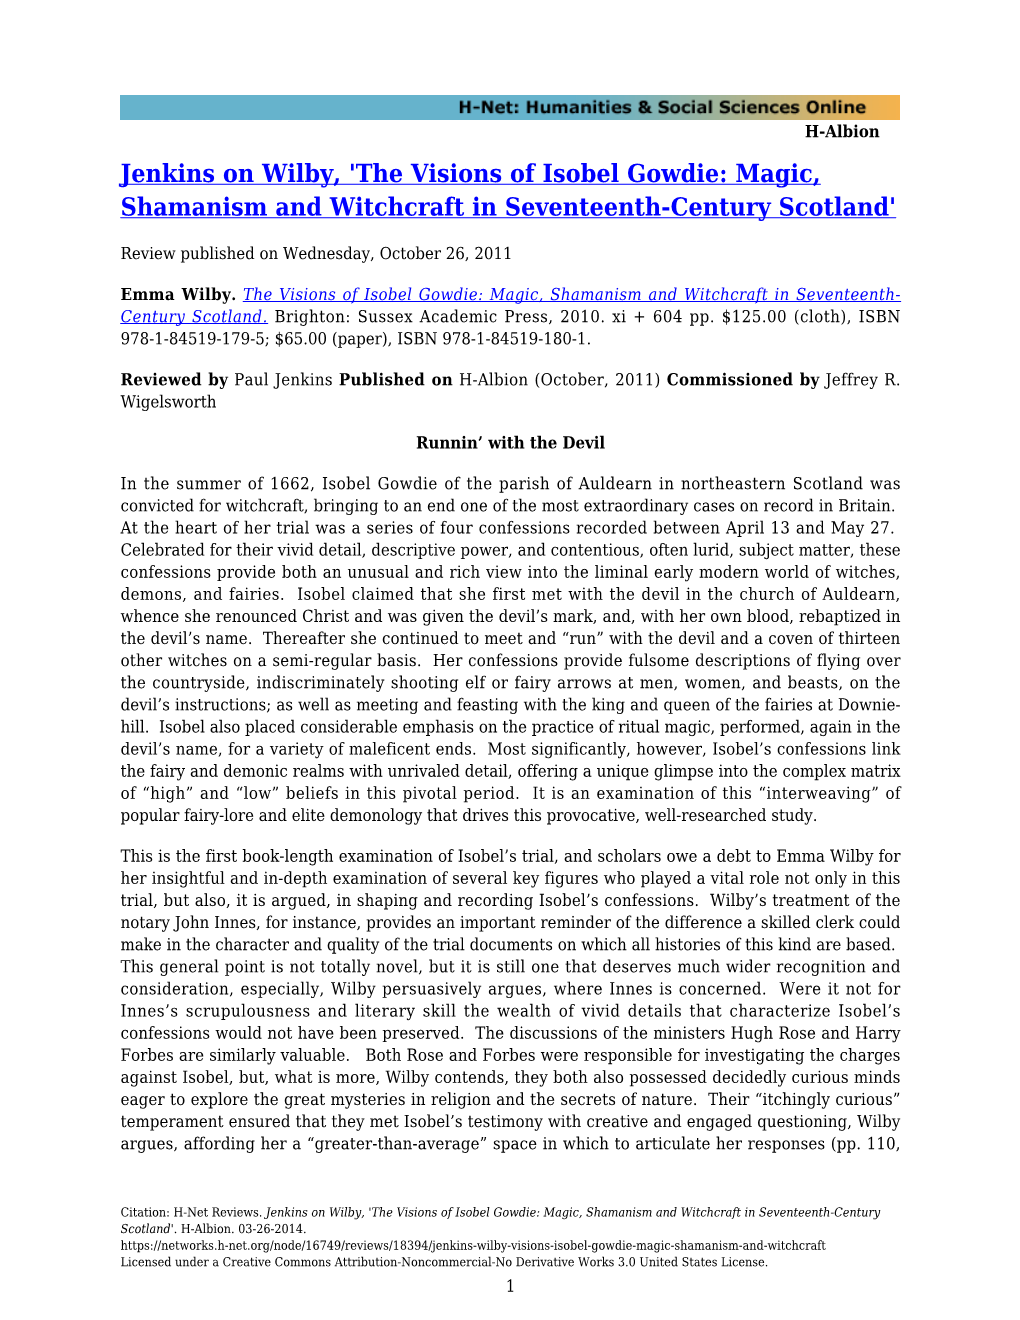 The Visions of Isobel Gowdie: Magic, Shamanism and Witchcraft in Seventeenth-Century Scotland'